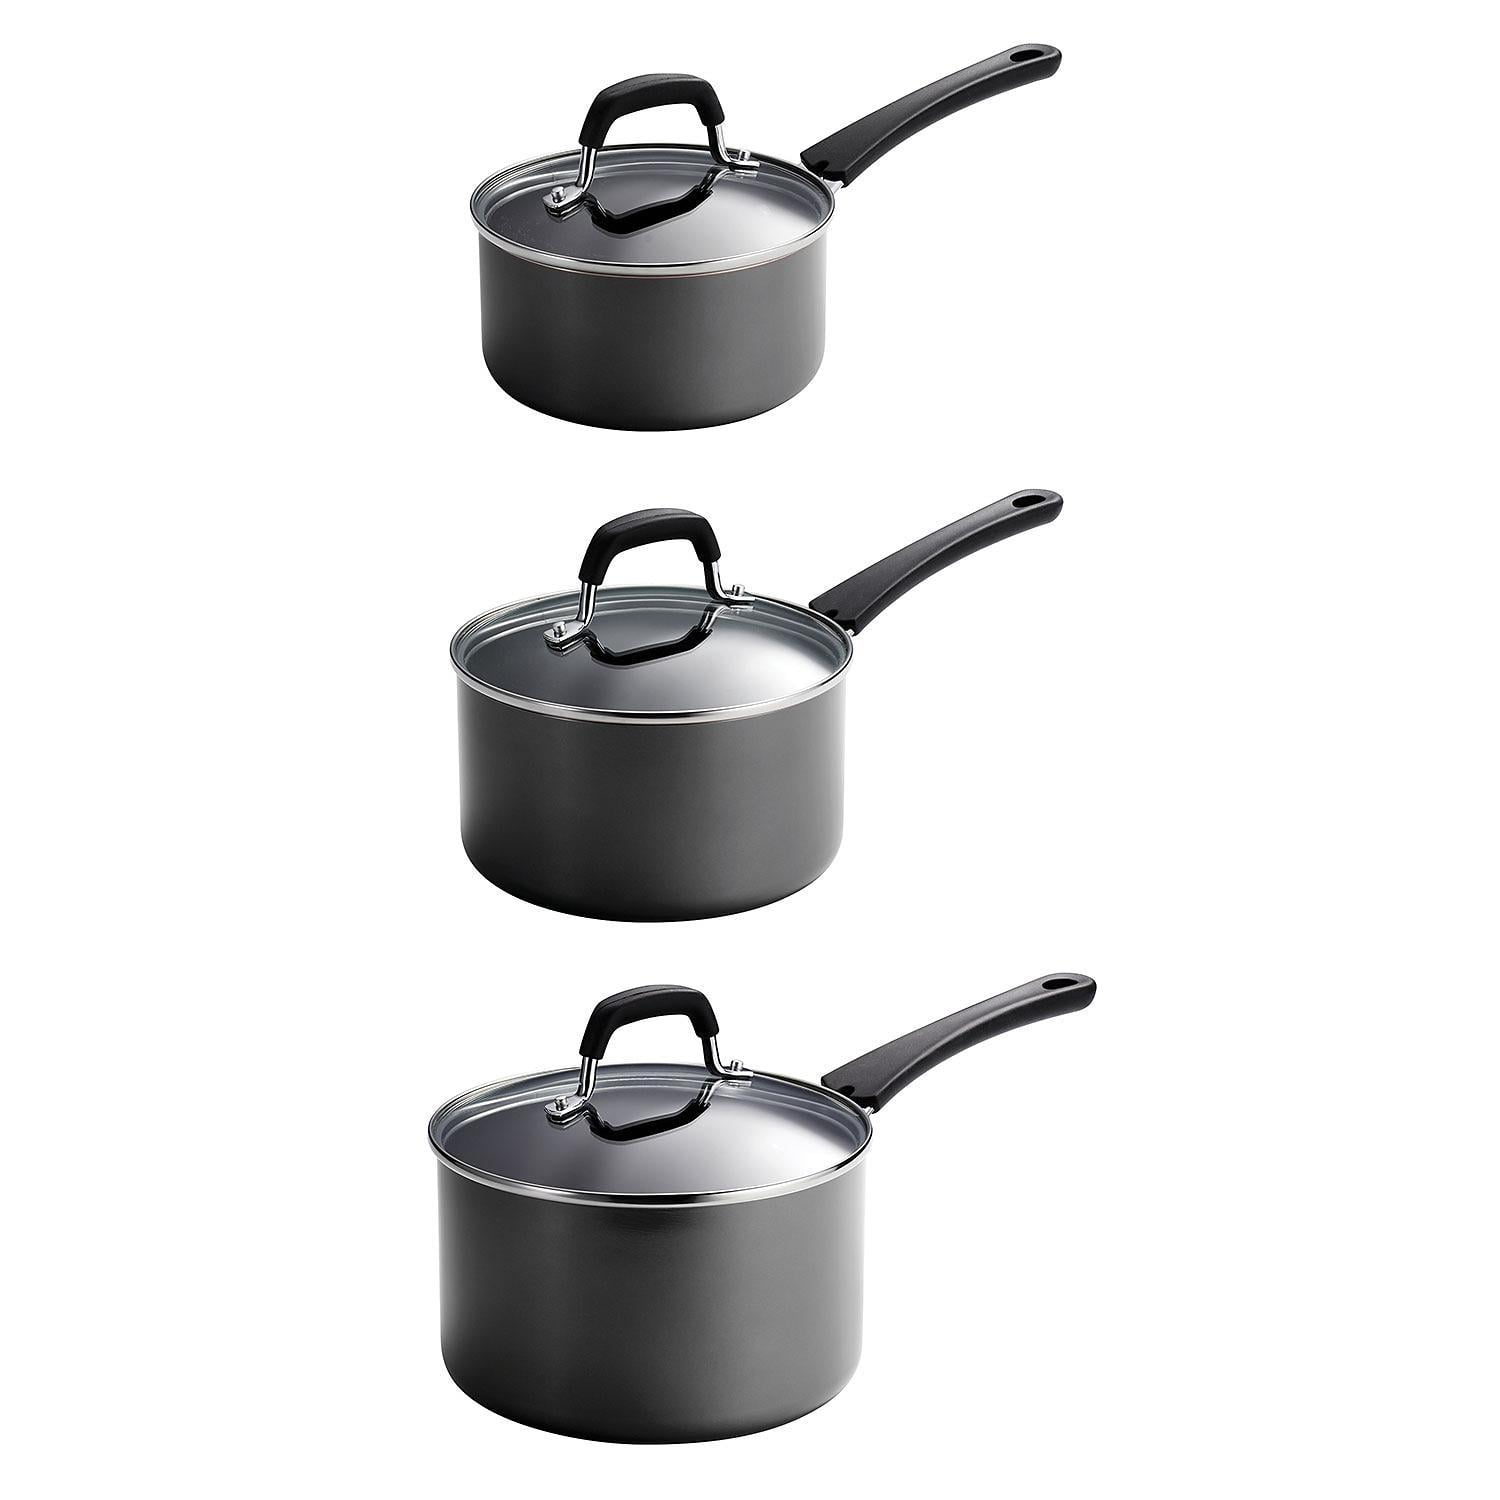 Tramontina 6-piece Stackable Sauce Pot Set for Sale in Greeley, CO - OfferUp